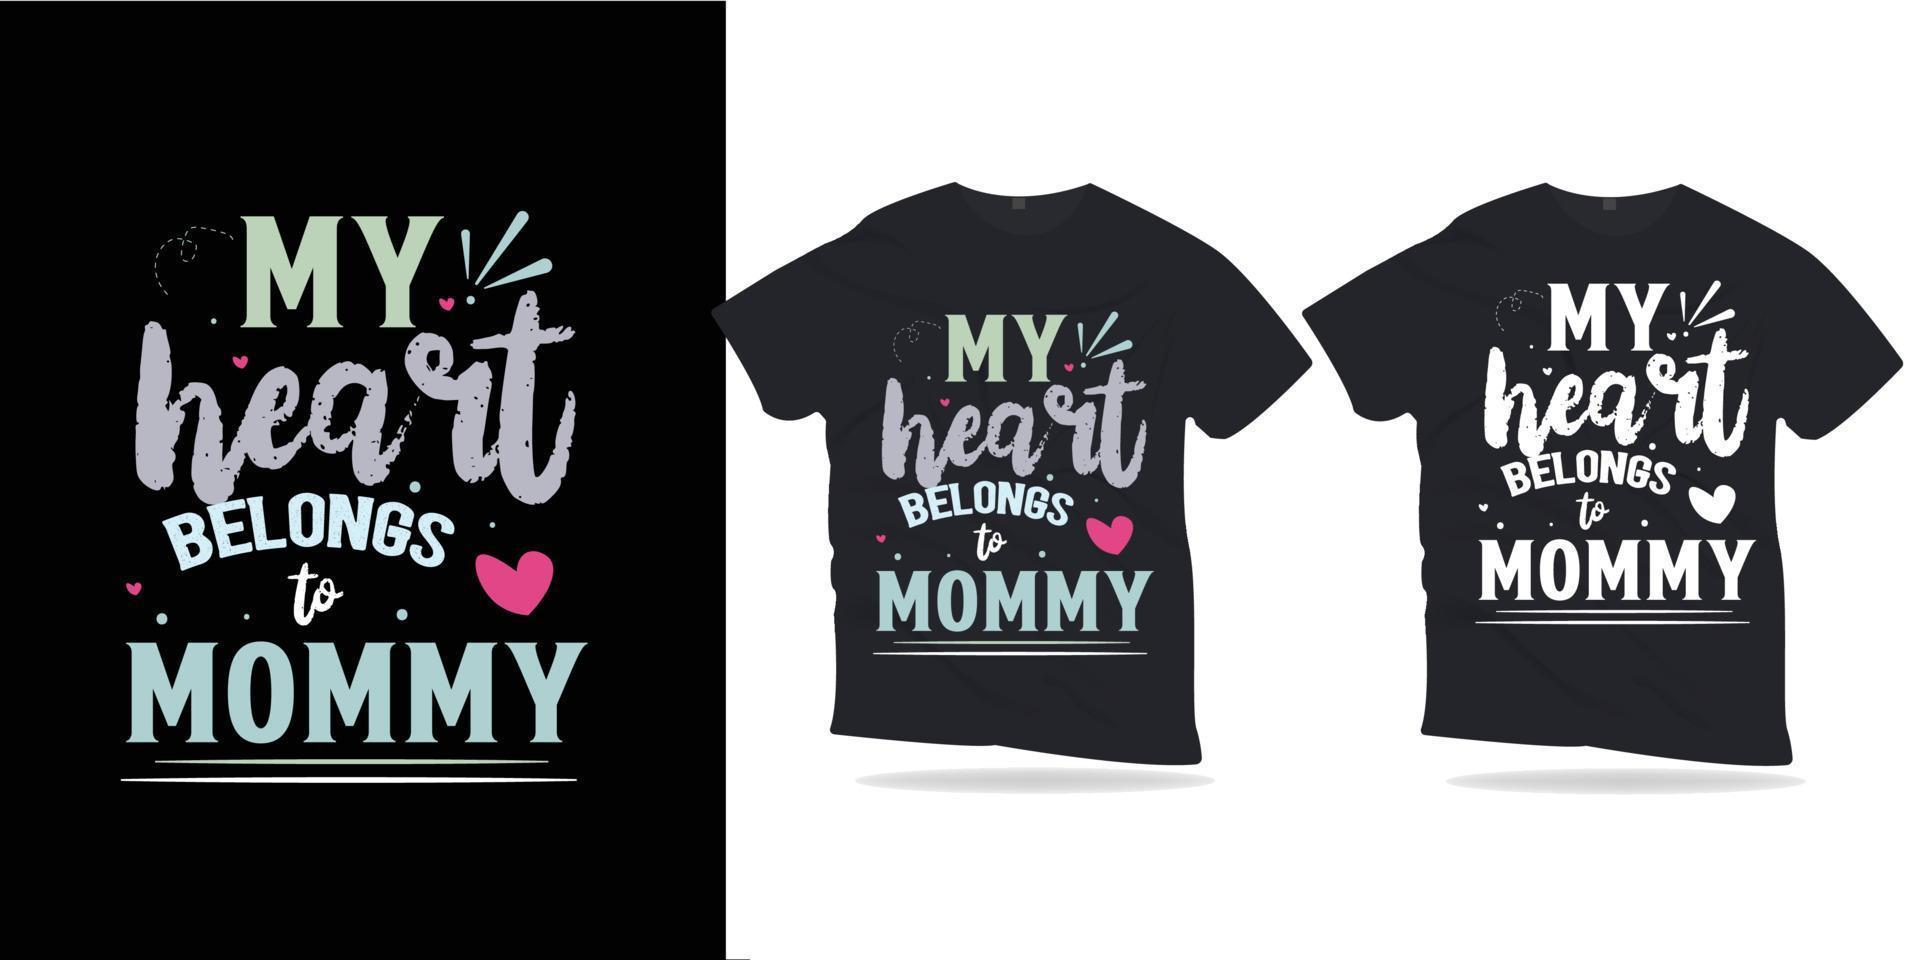 my heart belongs to mommy. Motivational Quotes lettering t-shirt design. vector